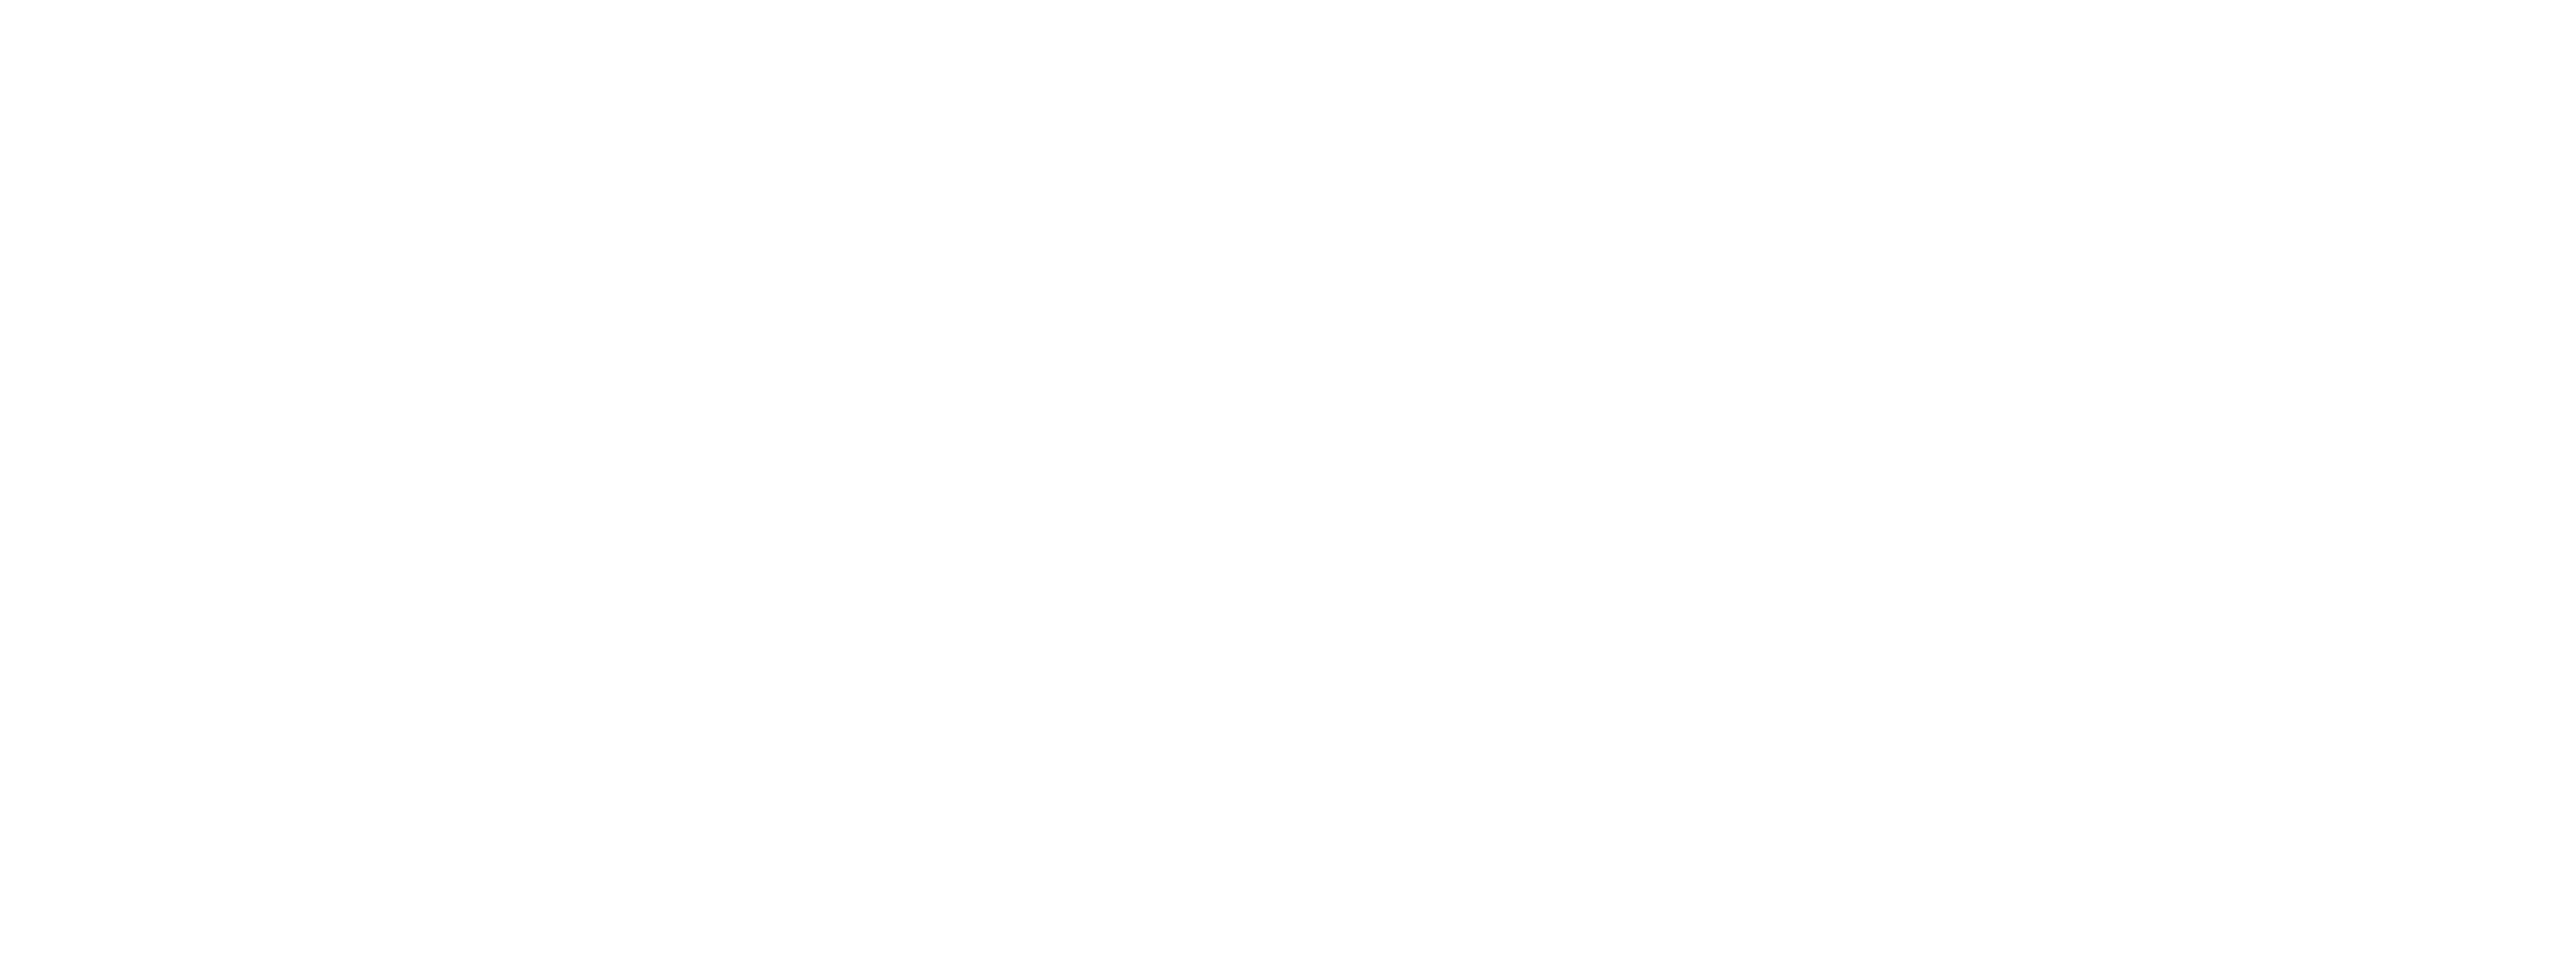 Snoopy Presents: Welcome Home, Franklin logo